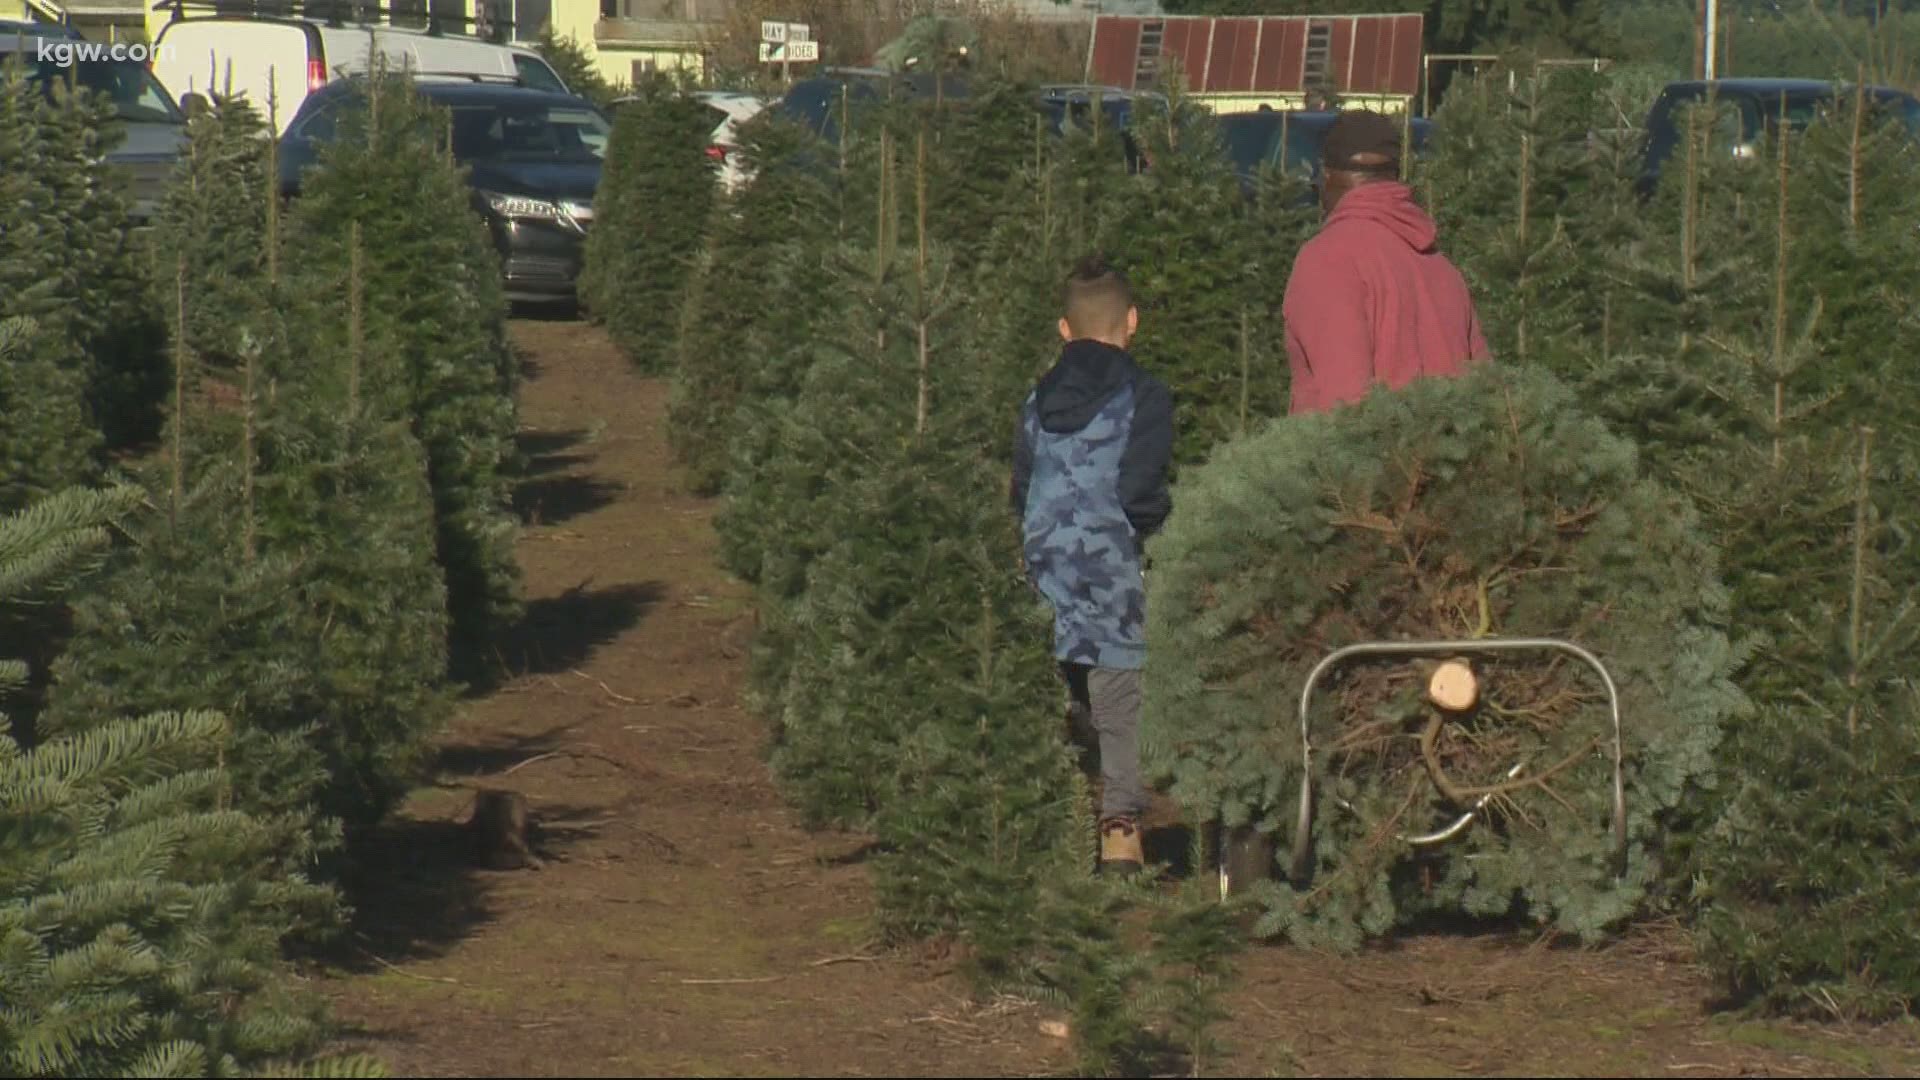 The weather cooperated and many people made the post-Thanksgiving pilgrimage to the Christmas tree lot or farm, as sales appear off to a strong start.